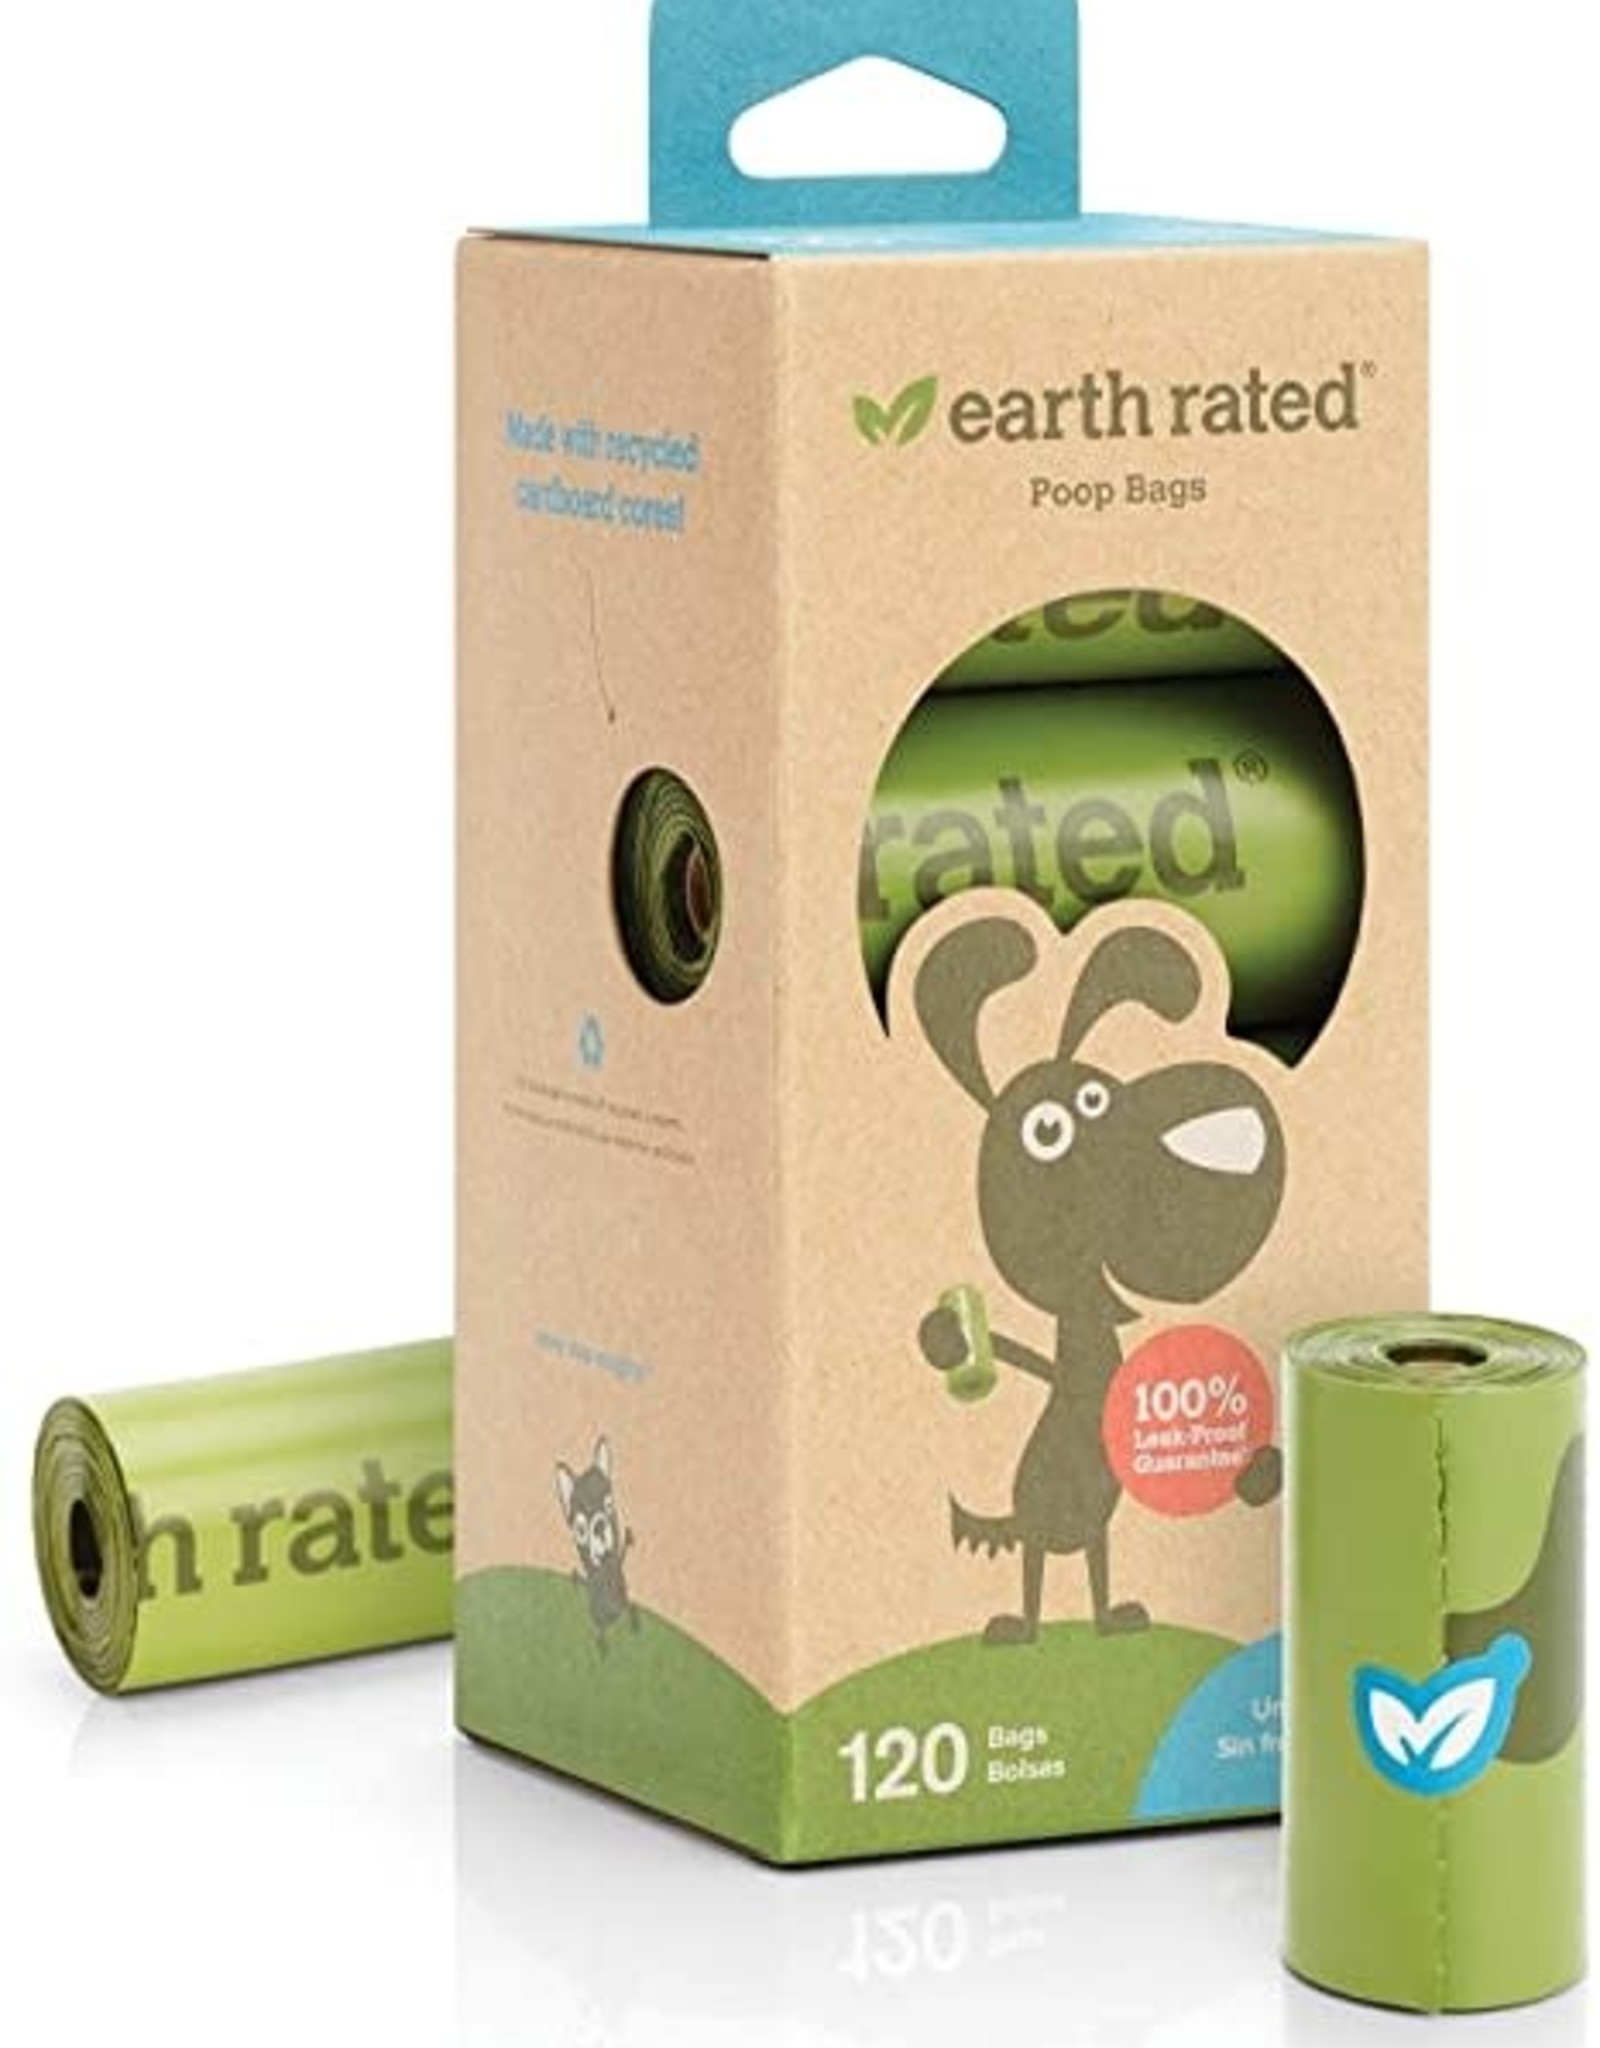 Earth Rated Earth Rated Poop Bags - 8 roll box